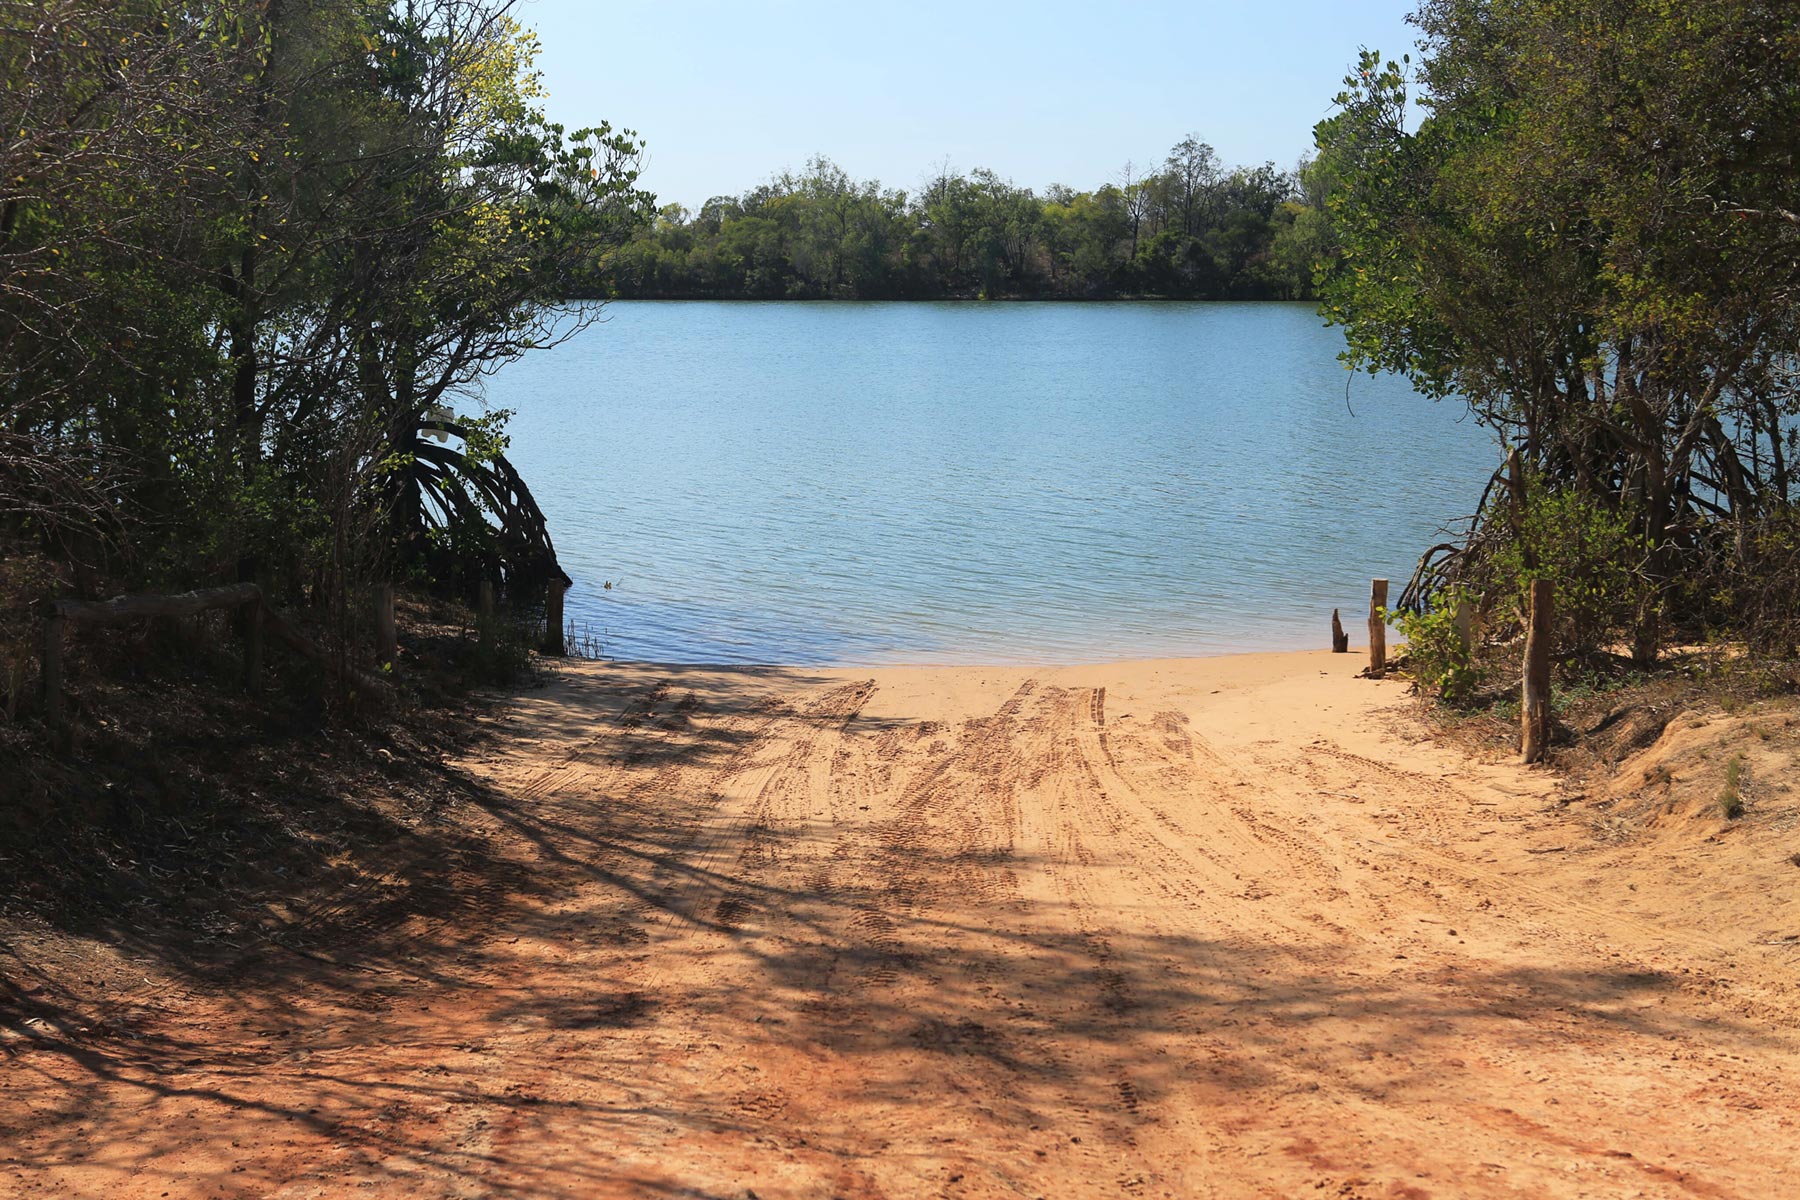 The natural boat ramp on the Limmen Bight River